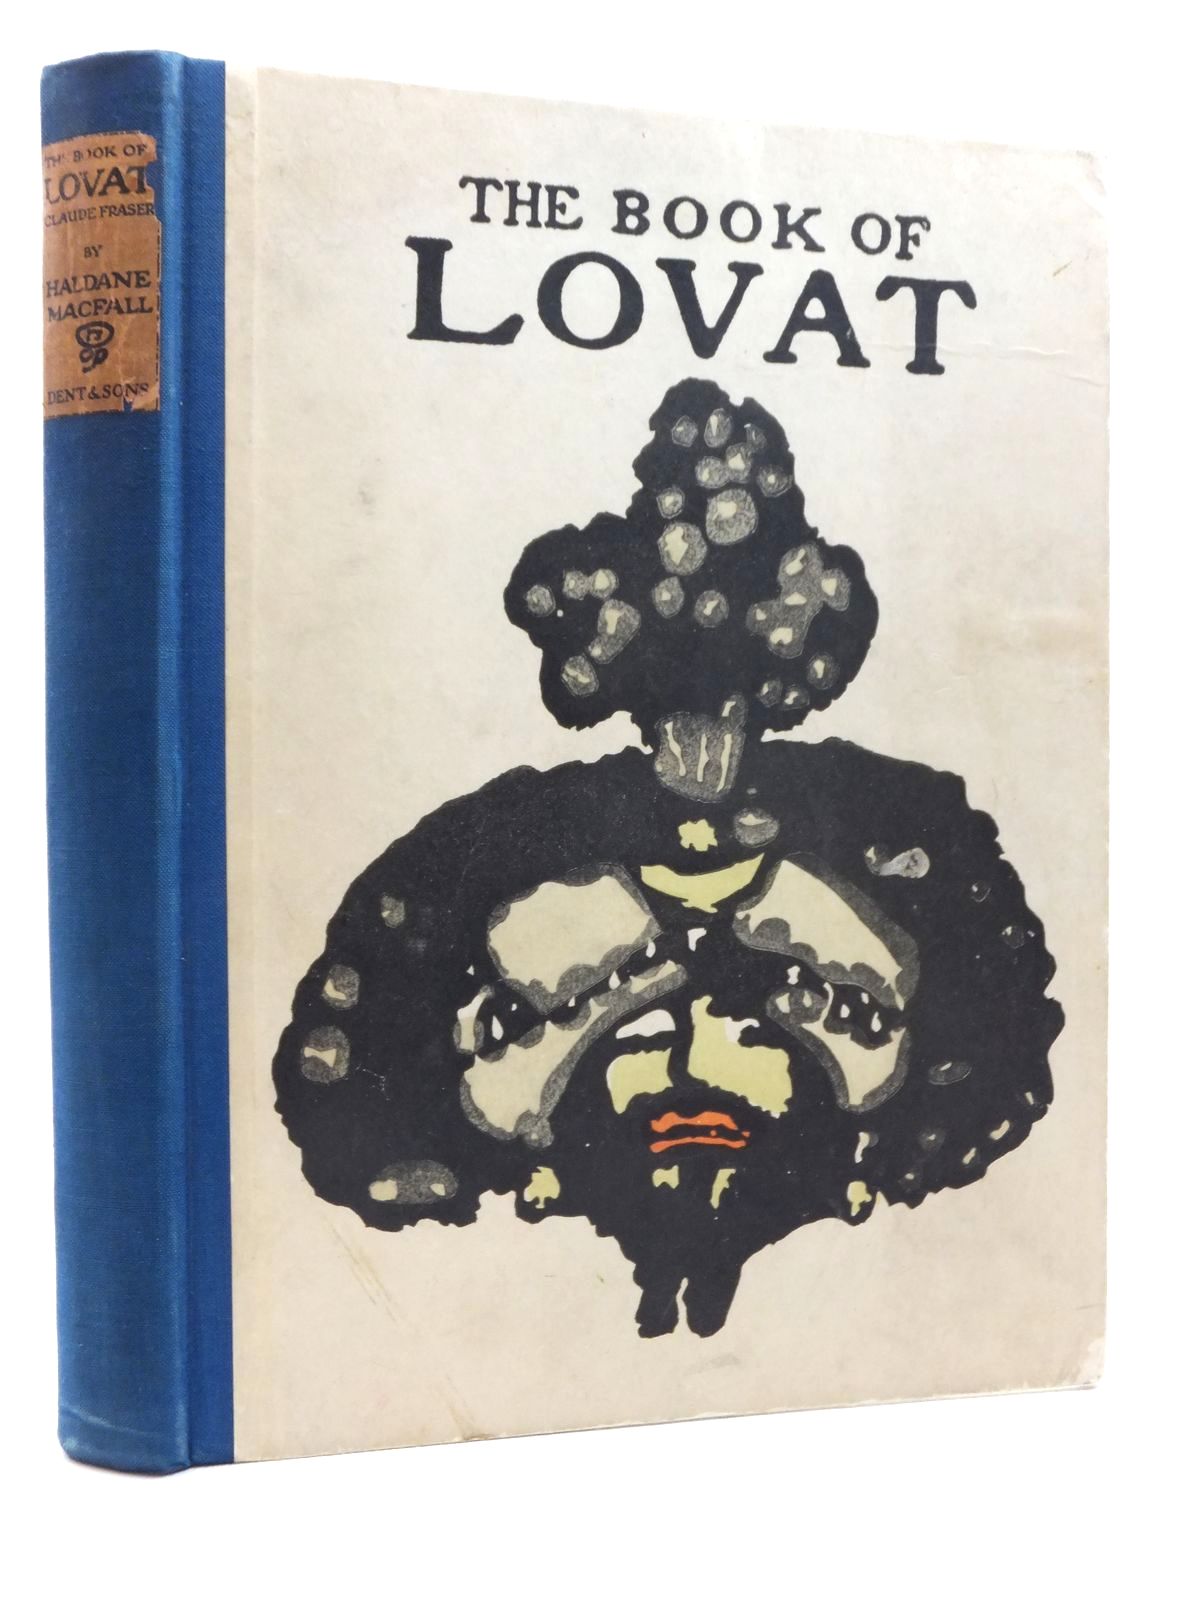 Photo of THE BOOK OF LOVAT CLAUD FRASER written by MacFall, Haldane illustrated by Fraser, Claud Lovat published by J.M. Dent &amp; Sons Ltd. (STOCK CODE: 2123610)  for sale by Stella & Rose's Books